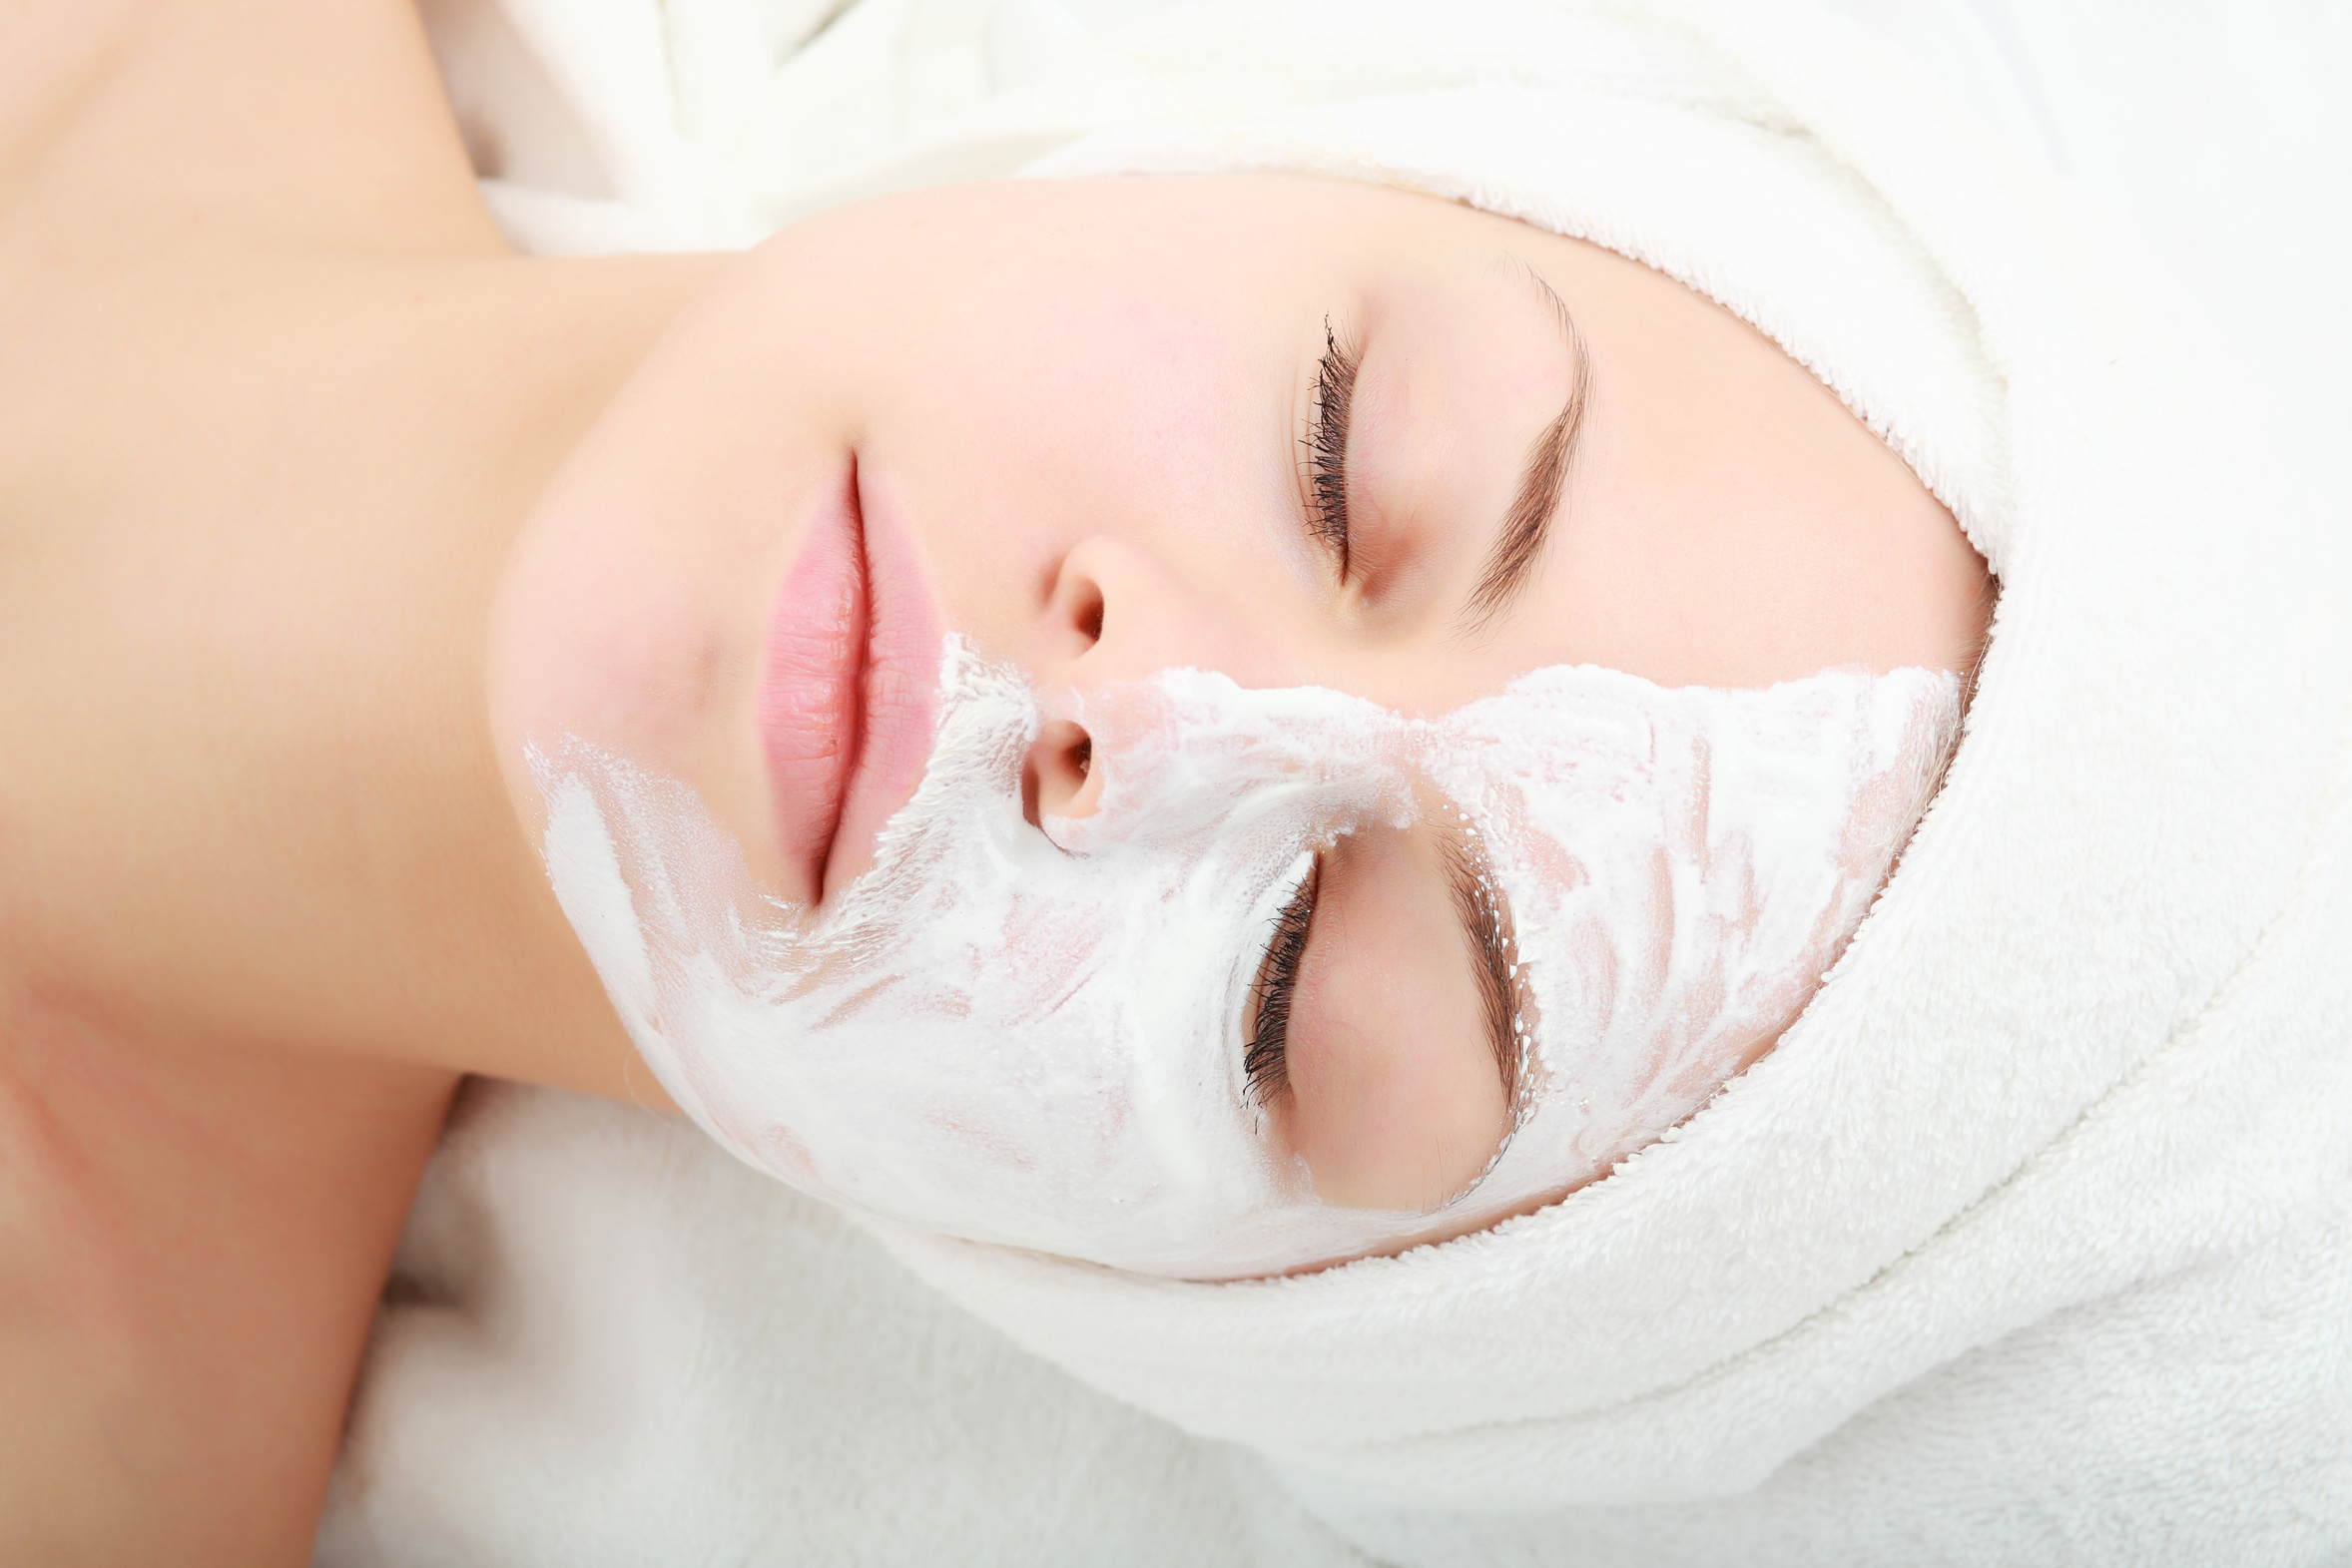 Taking Care Of Your Skin After Cosmetic Surgery